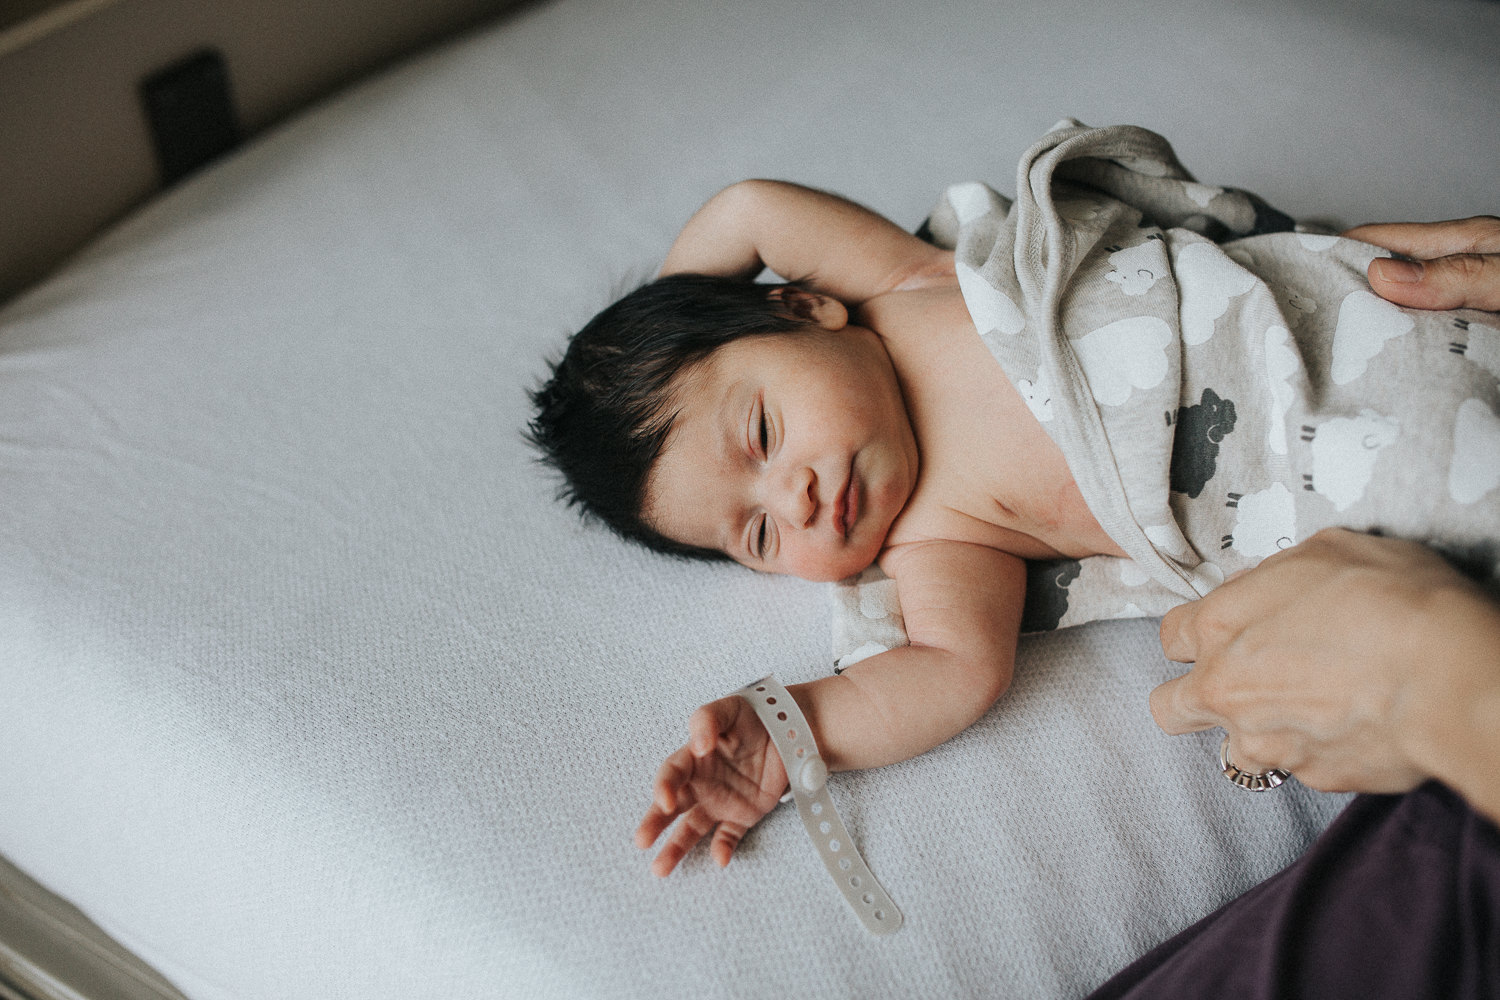 1 day old baby girl with lots of dark hair in swaddle lying on hospital bed - Markham Fresh 48 Photography